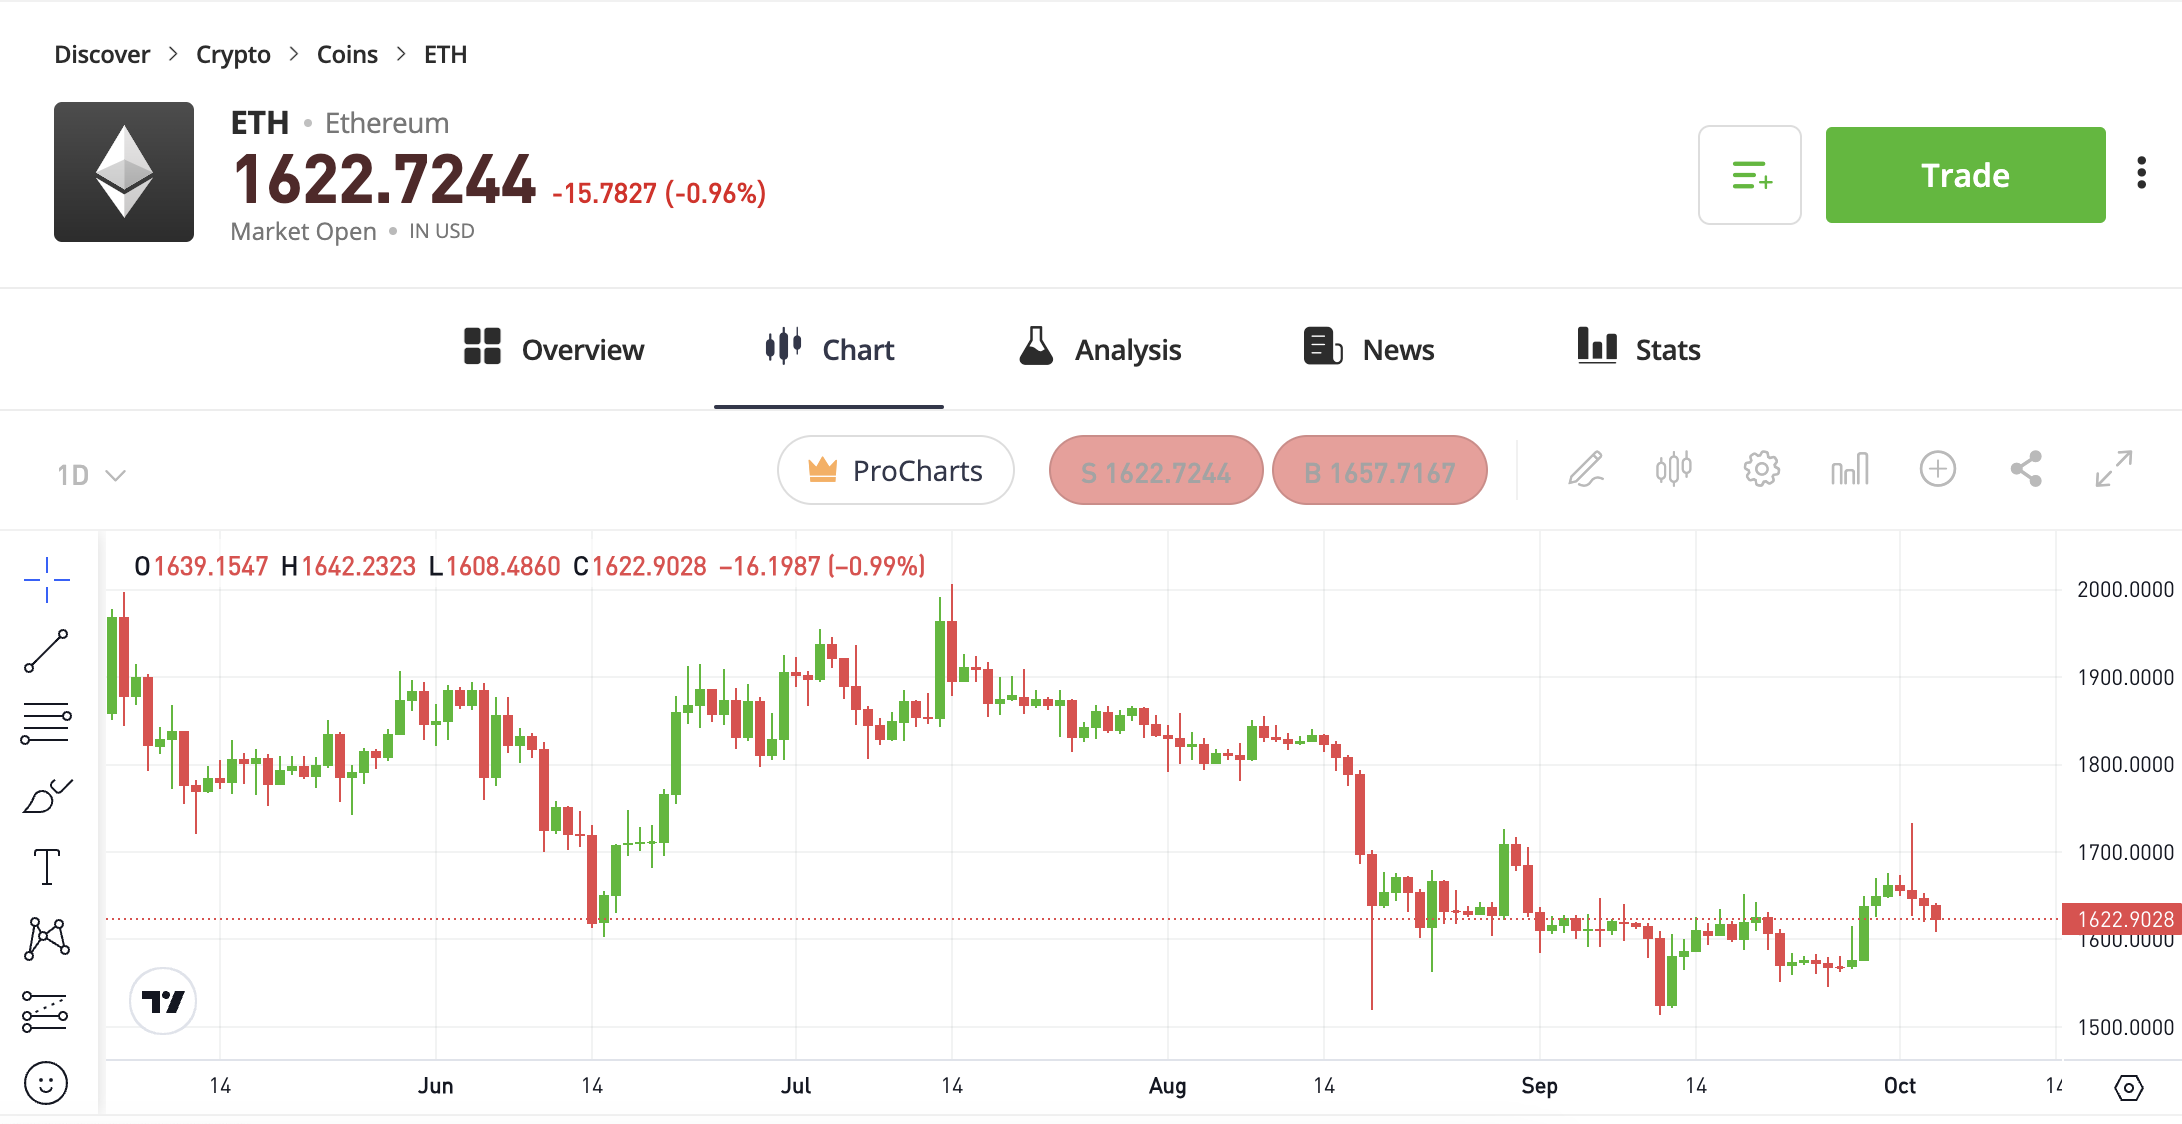 Ether (ETH) Price - Buy, Sell & View The Price of Ether Crypto | Gemini